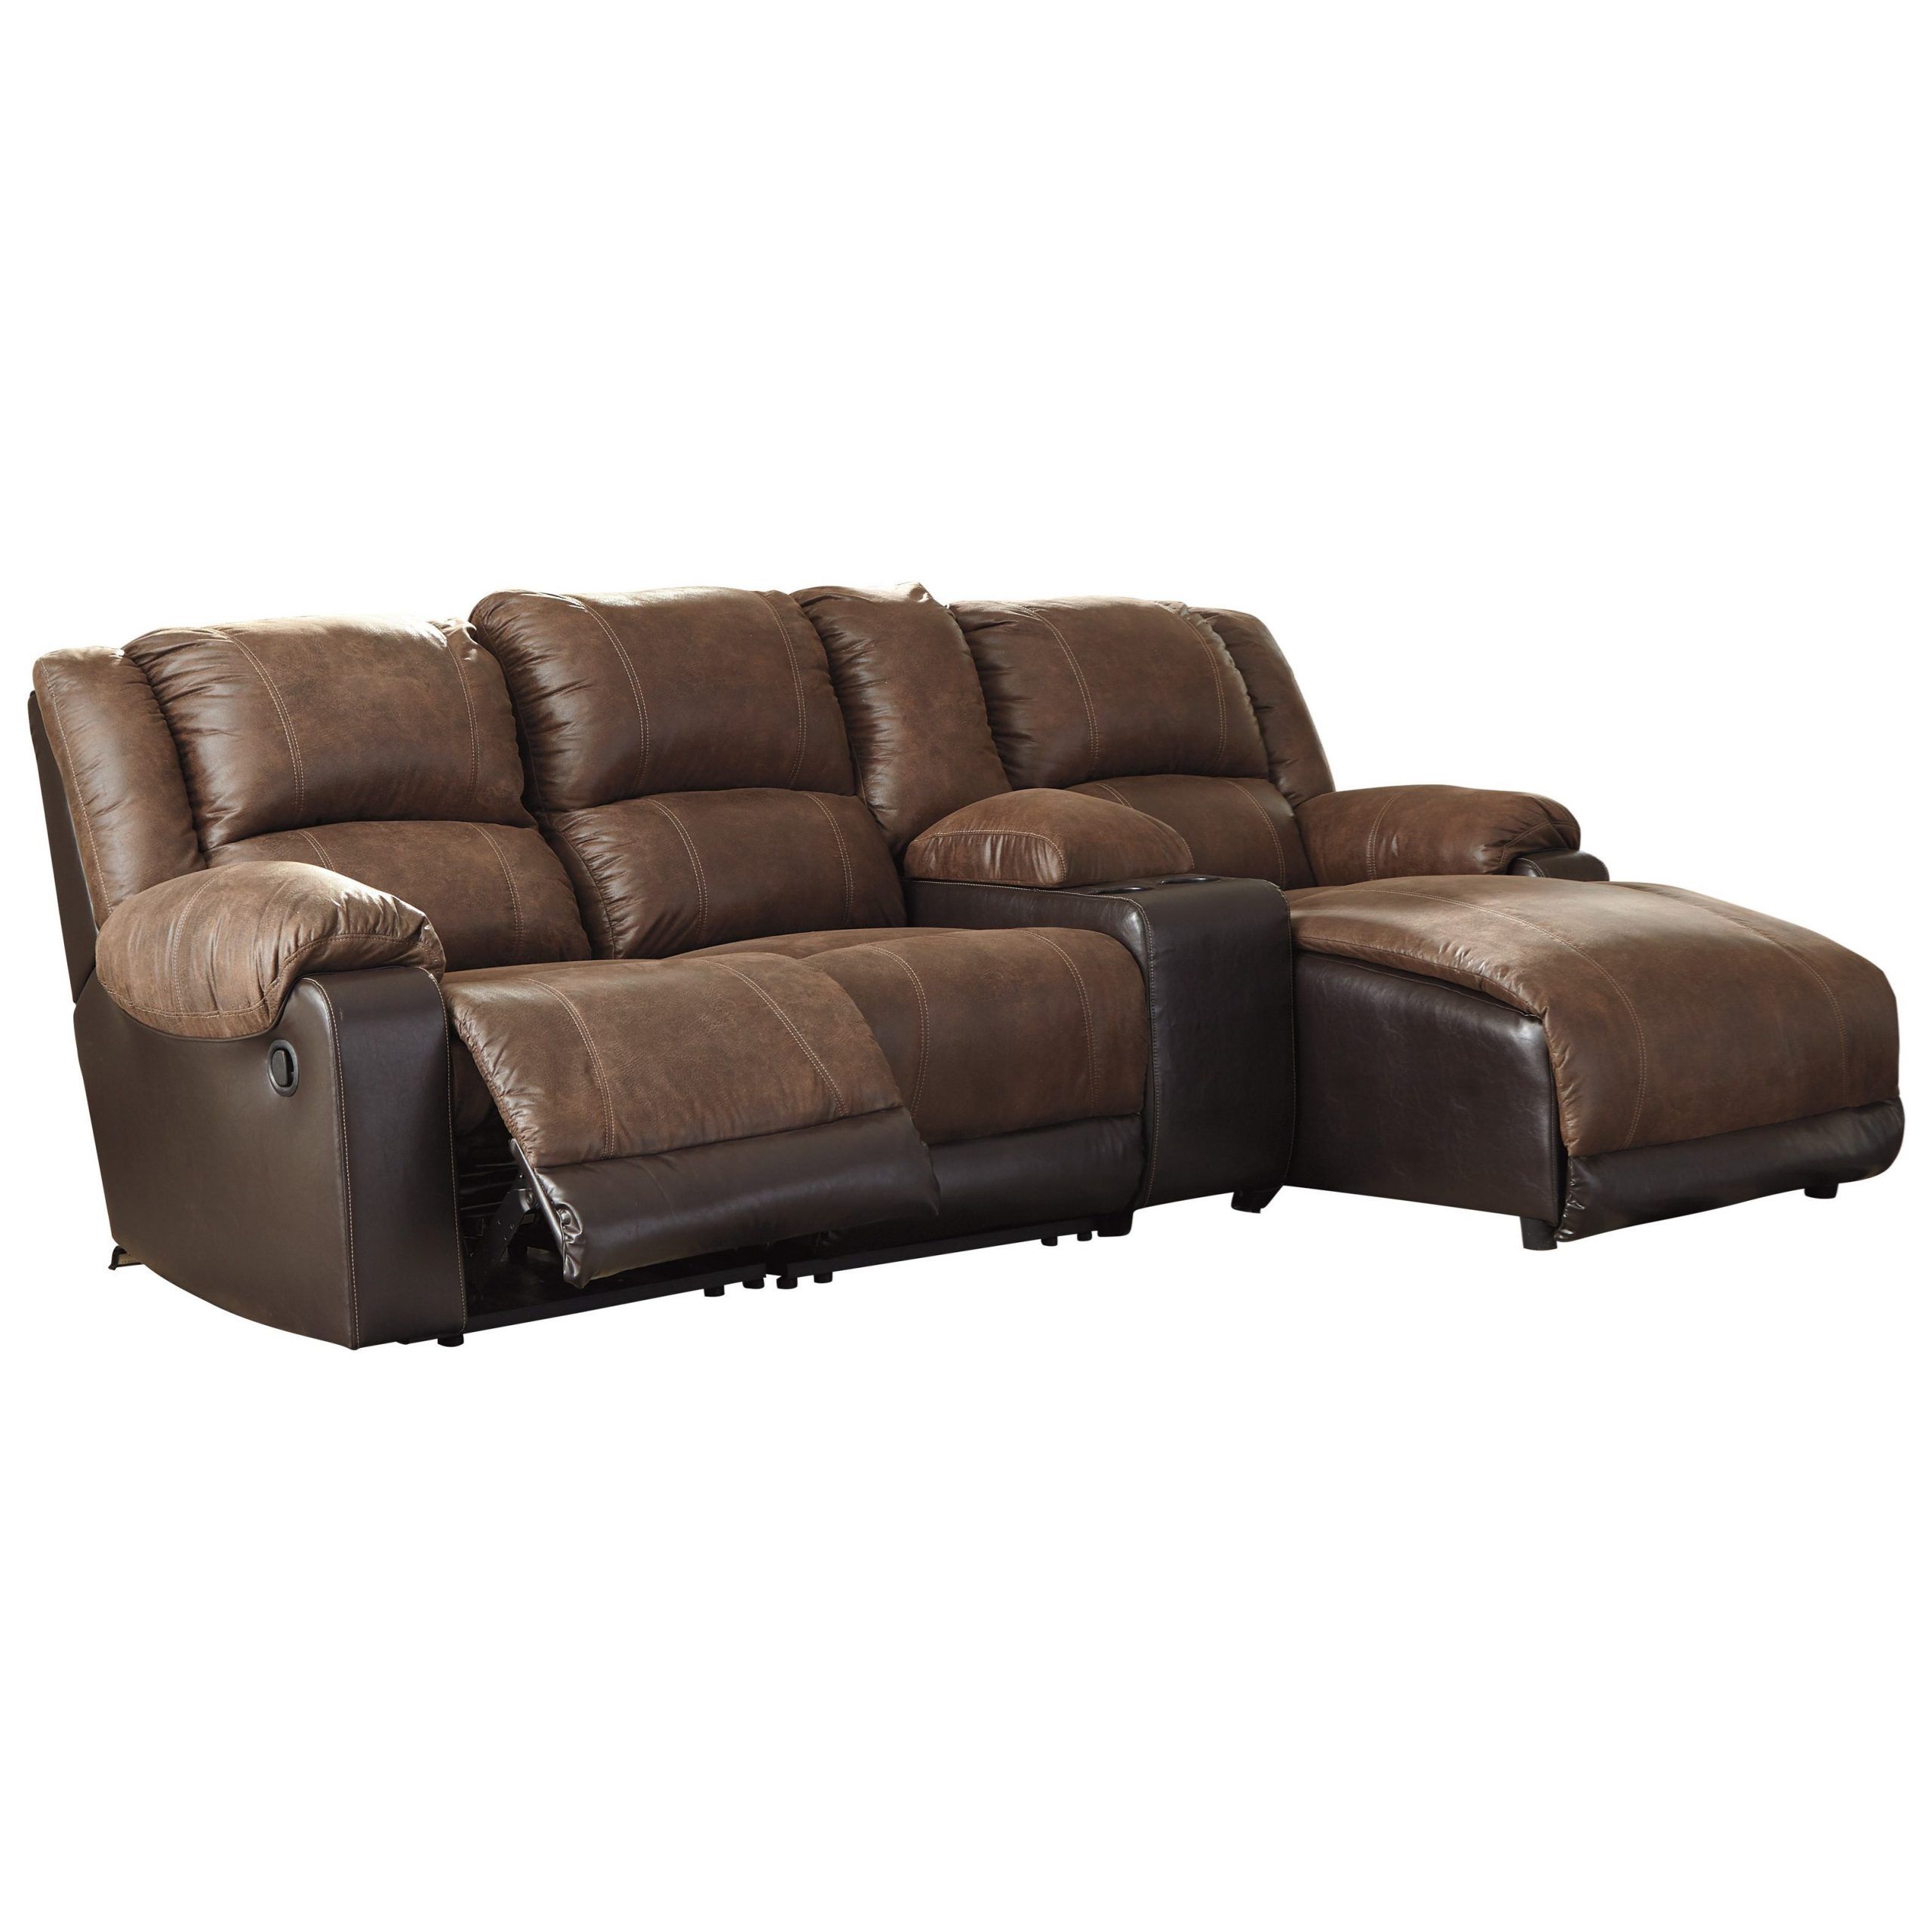 Nantahala Reclining Chaise Sofa With Storage Console | Van With Regard To Palisades Reclining Sectional Sofas With Left Storage Chaise (View 2 of 15)